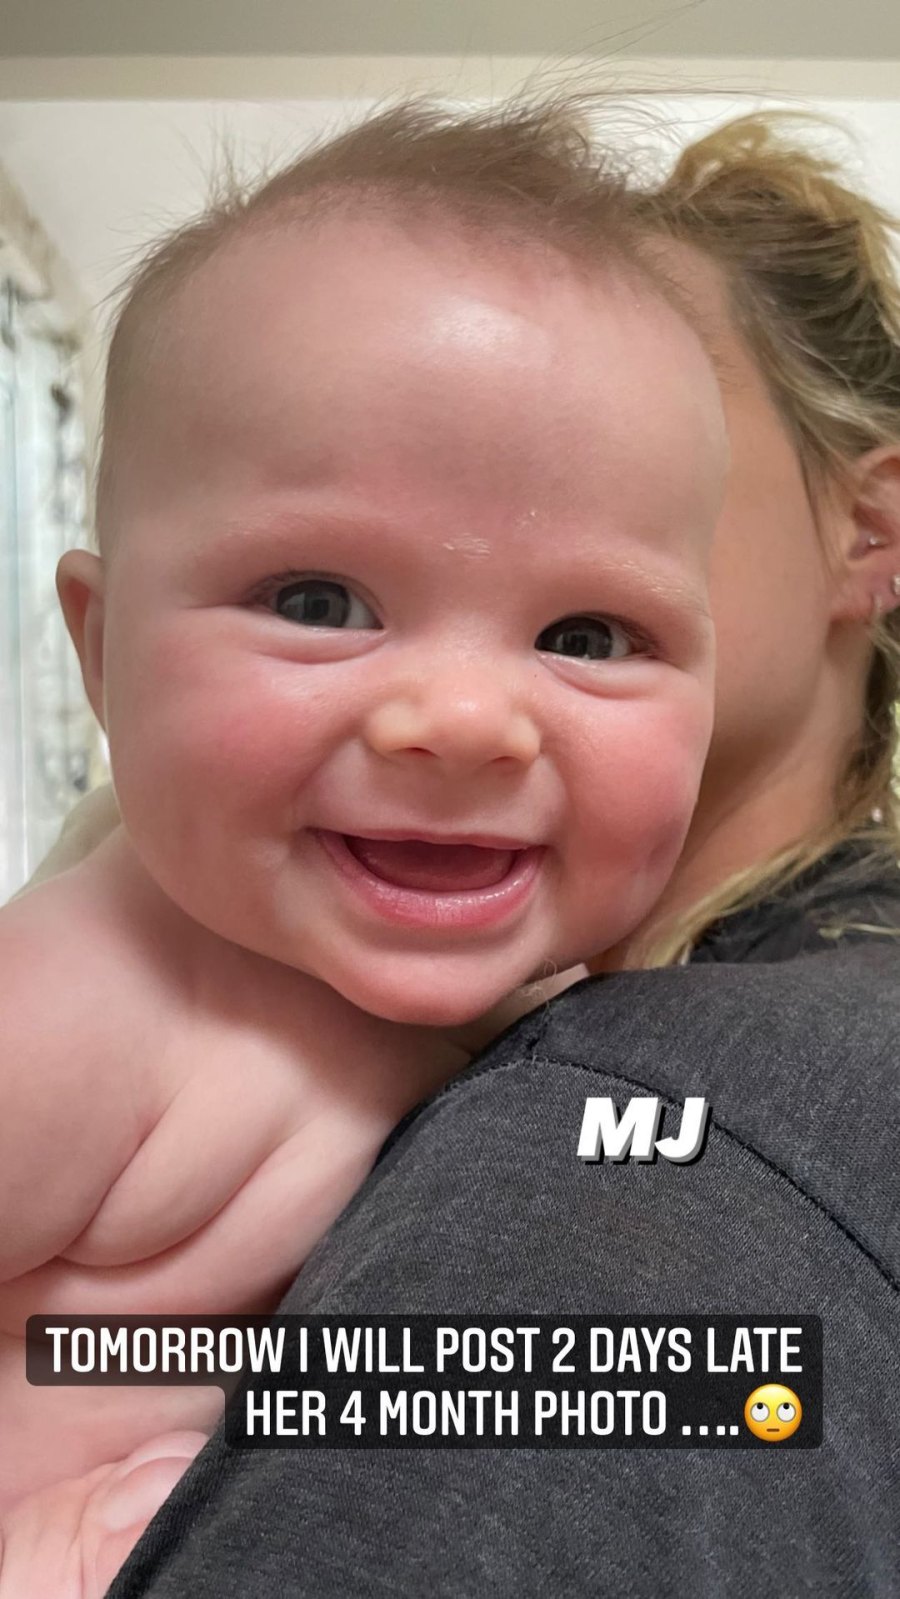 Hilary Duff Reveals 4-Month-Old Daughter Mae's Nickname